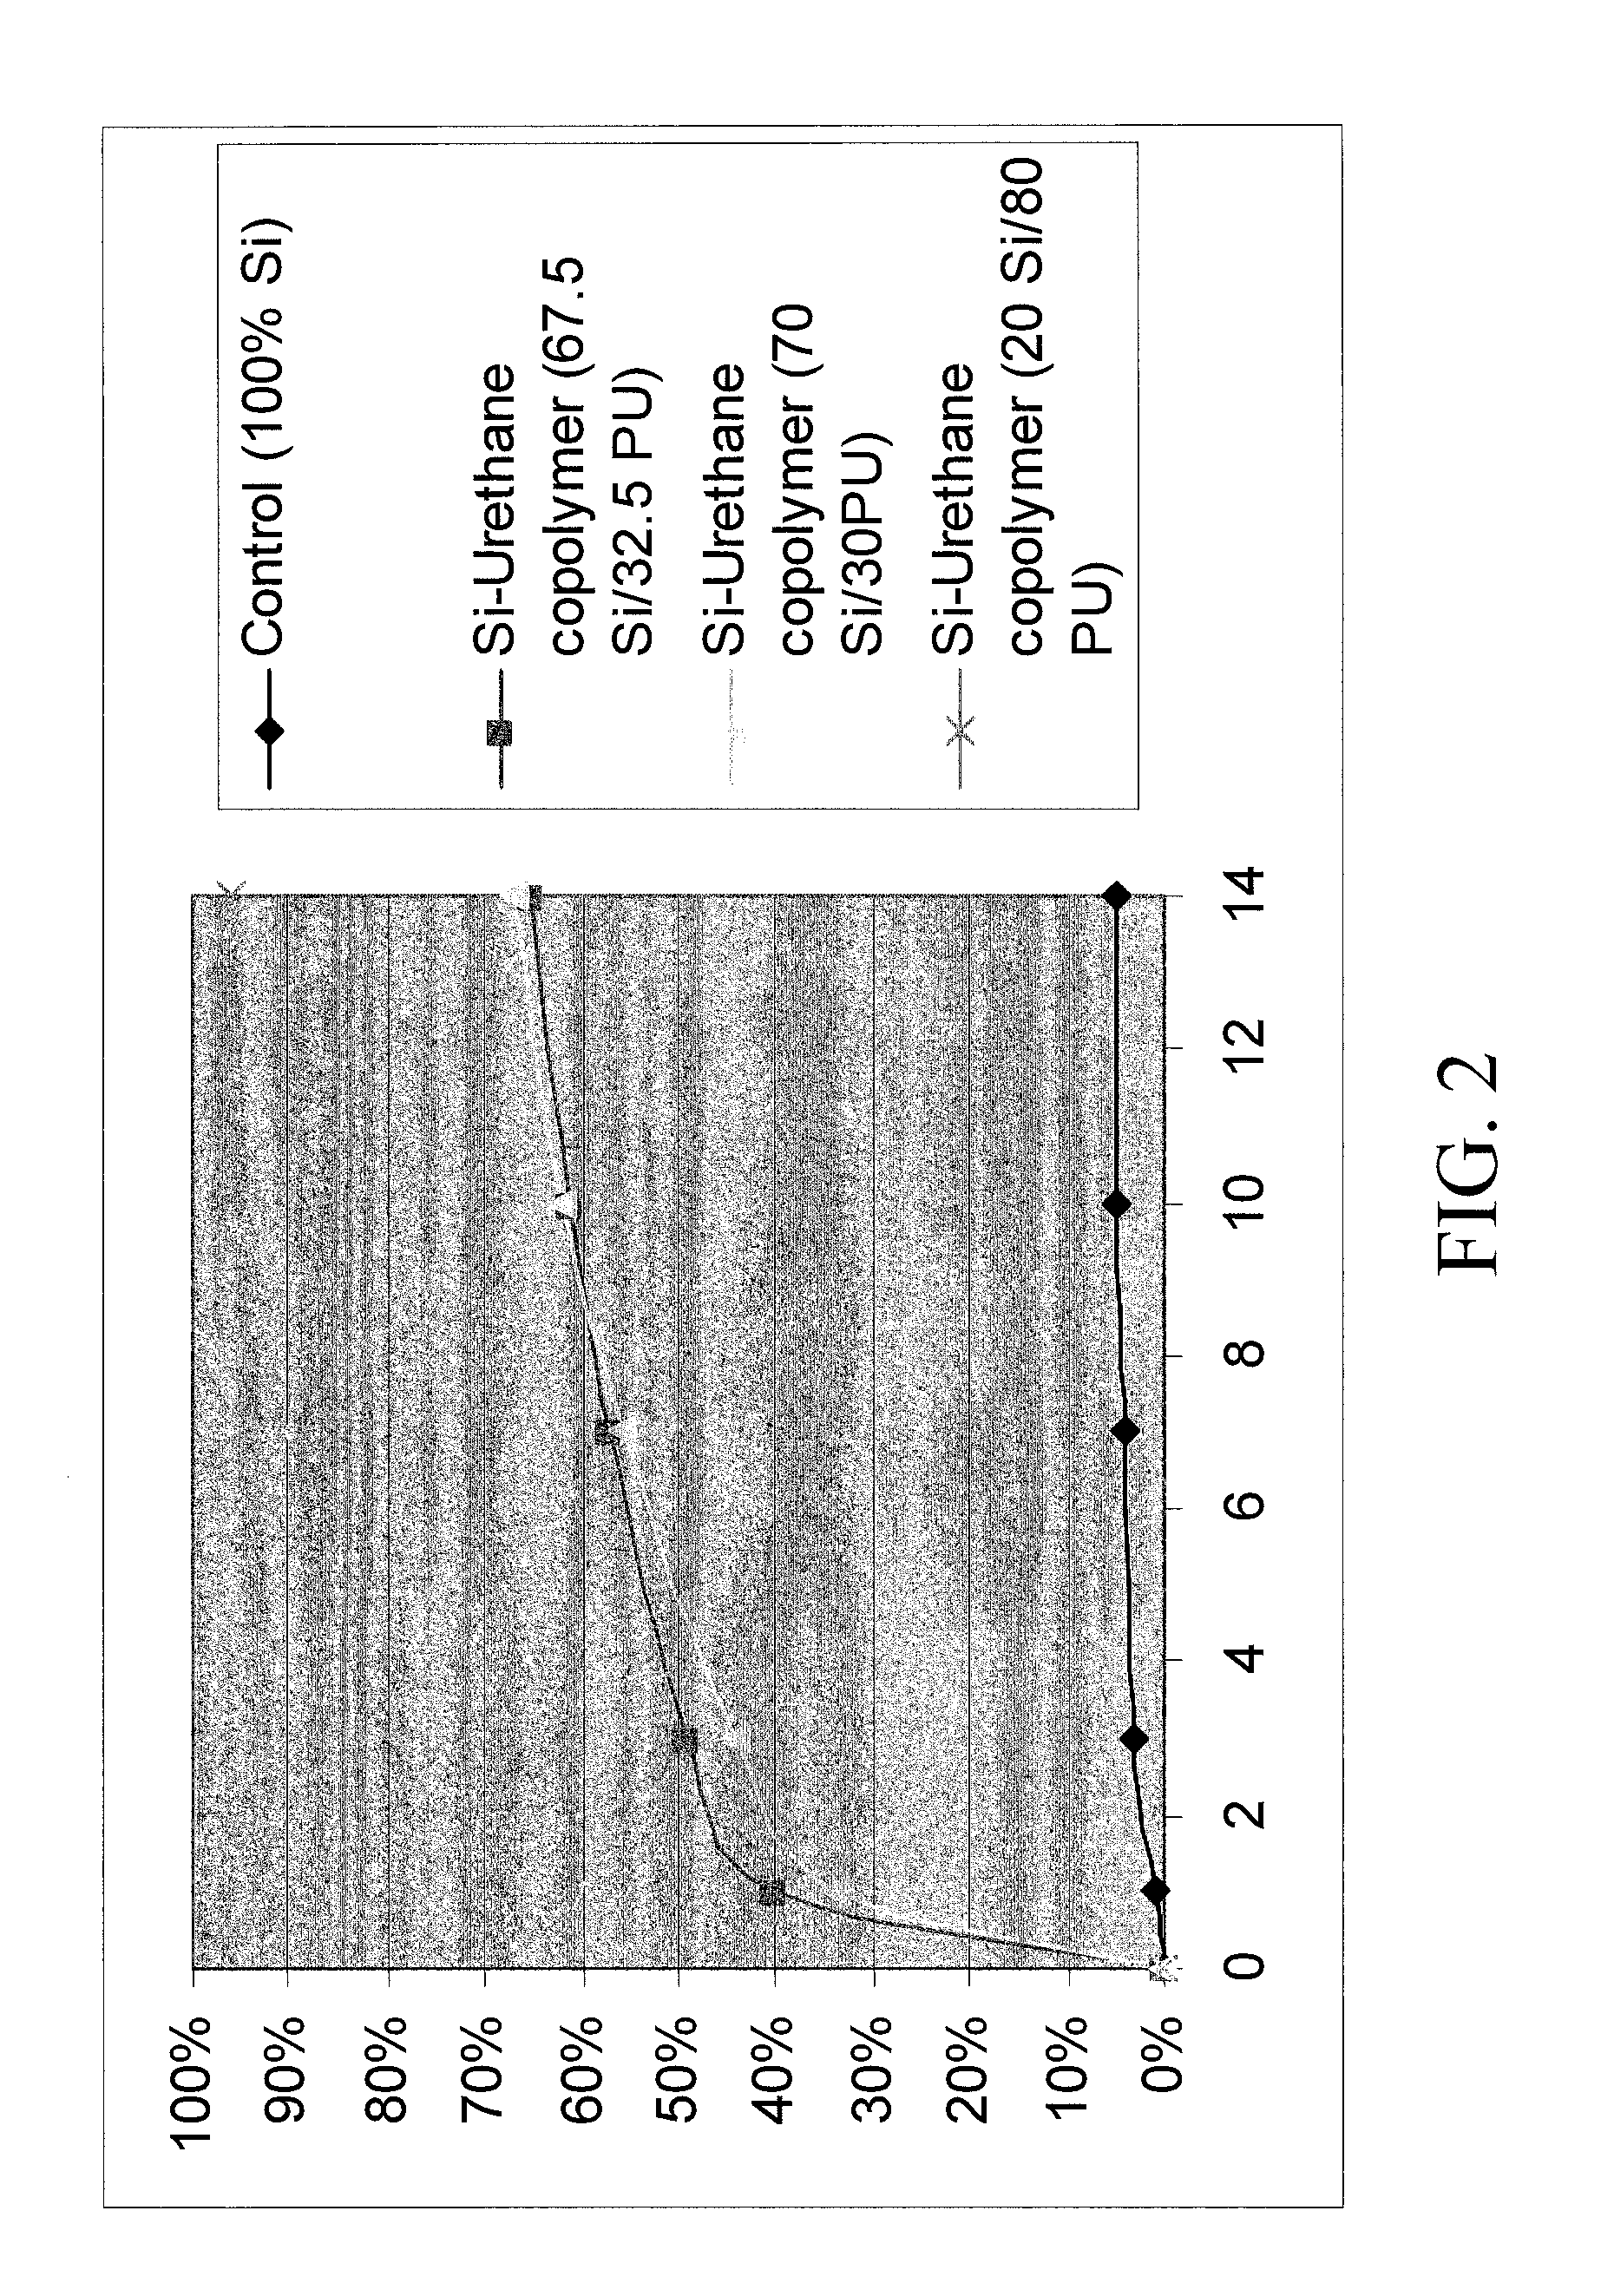 Polymer for Controlling Delivery of Bioactive Agents and Method of Use